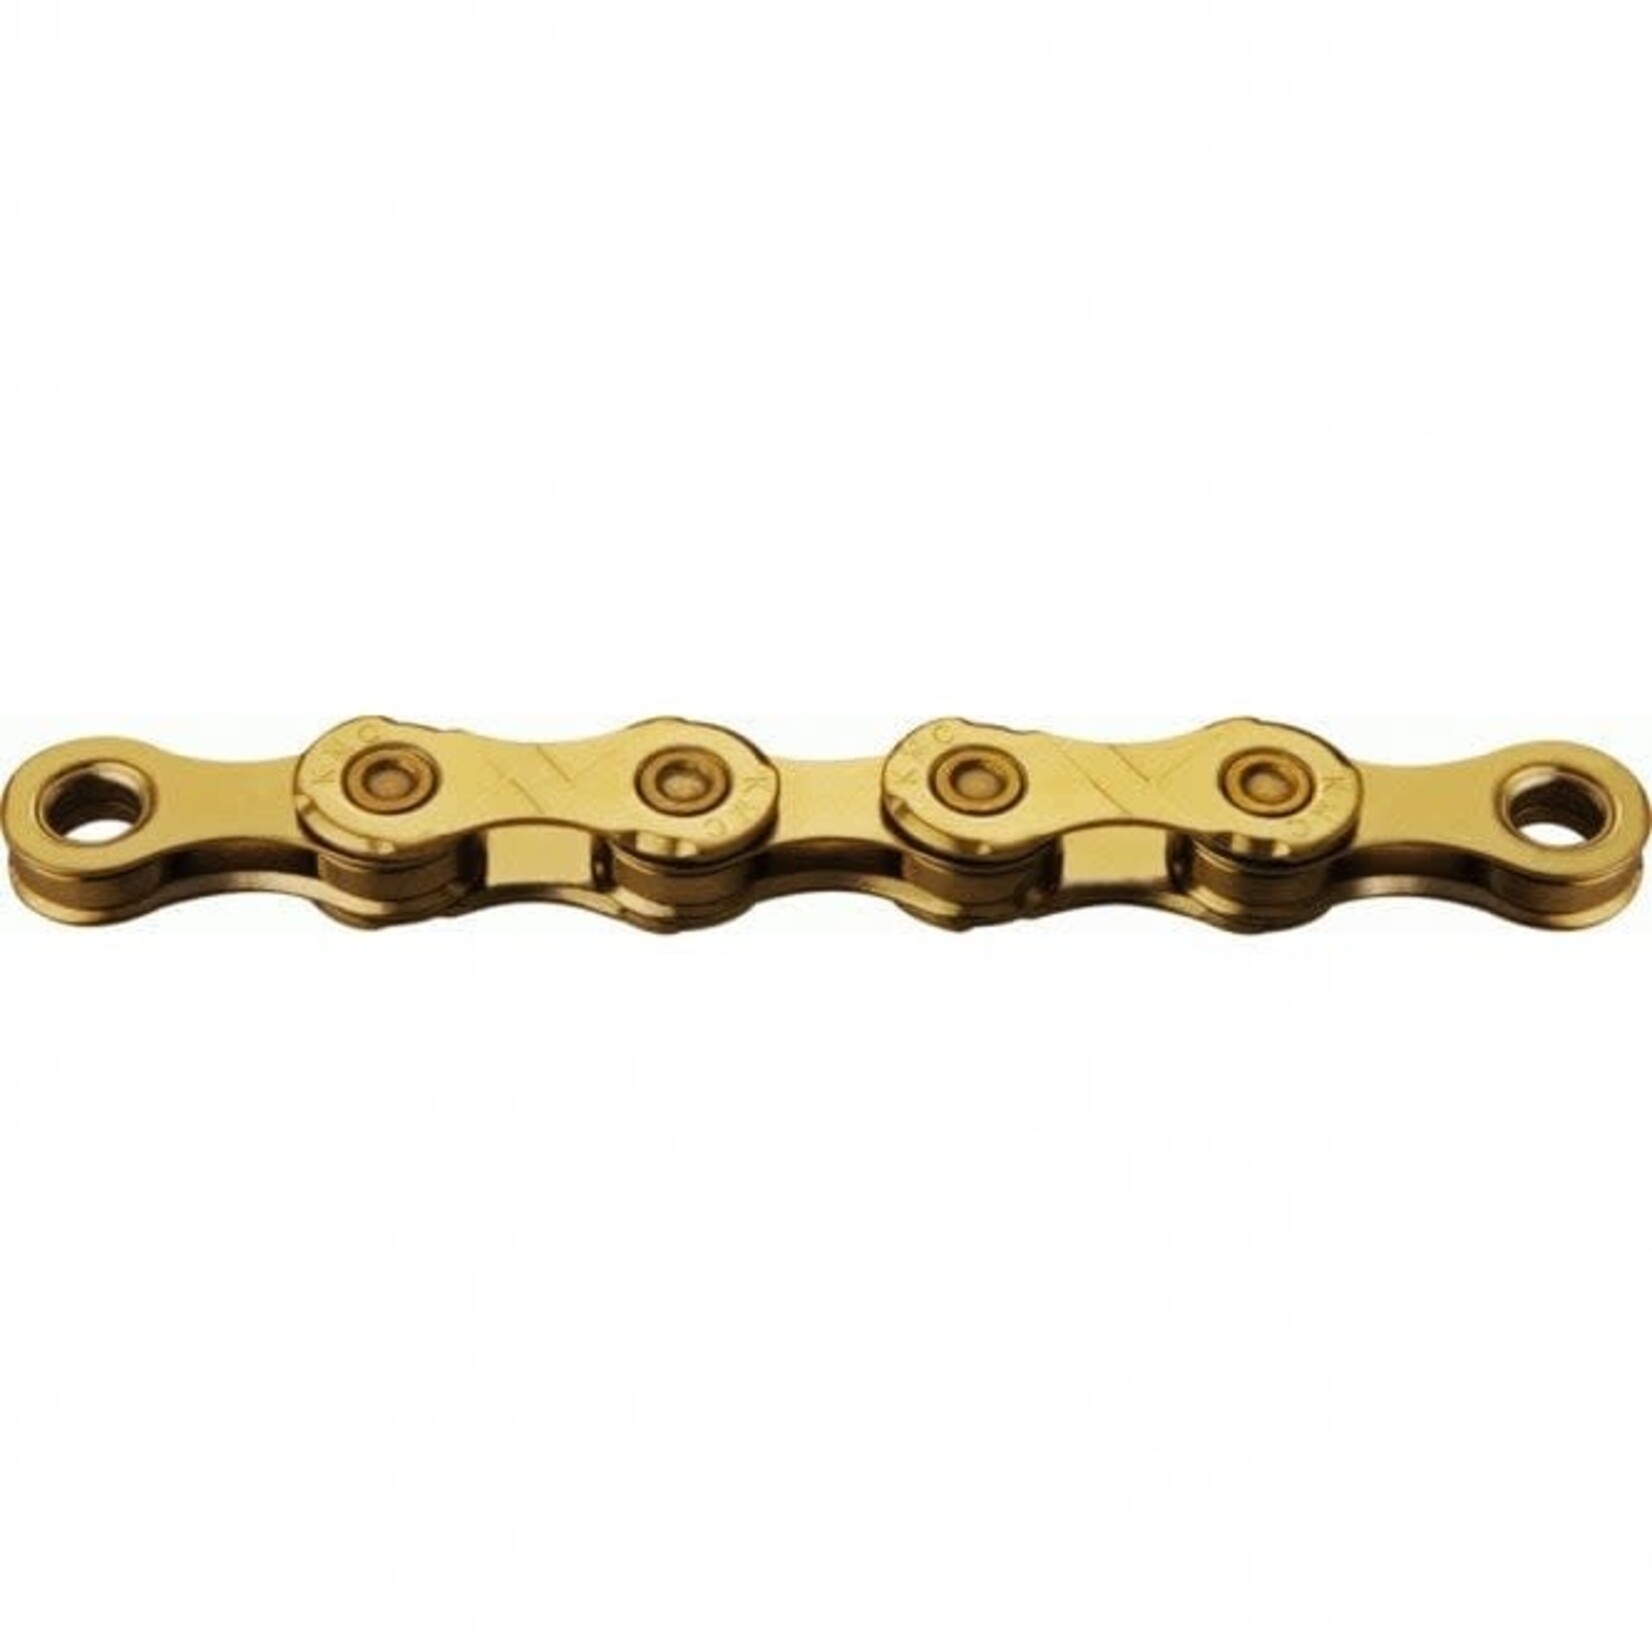 KMC KMC X12 126 Link 12 Speed Chain Gold